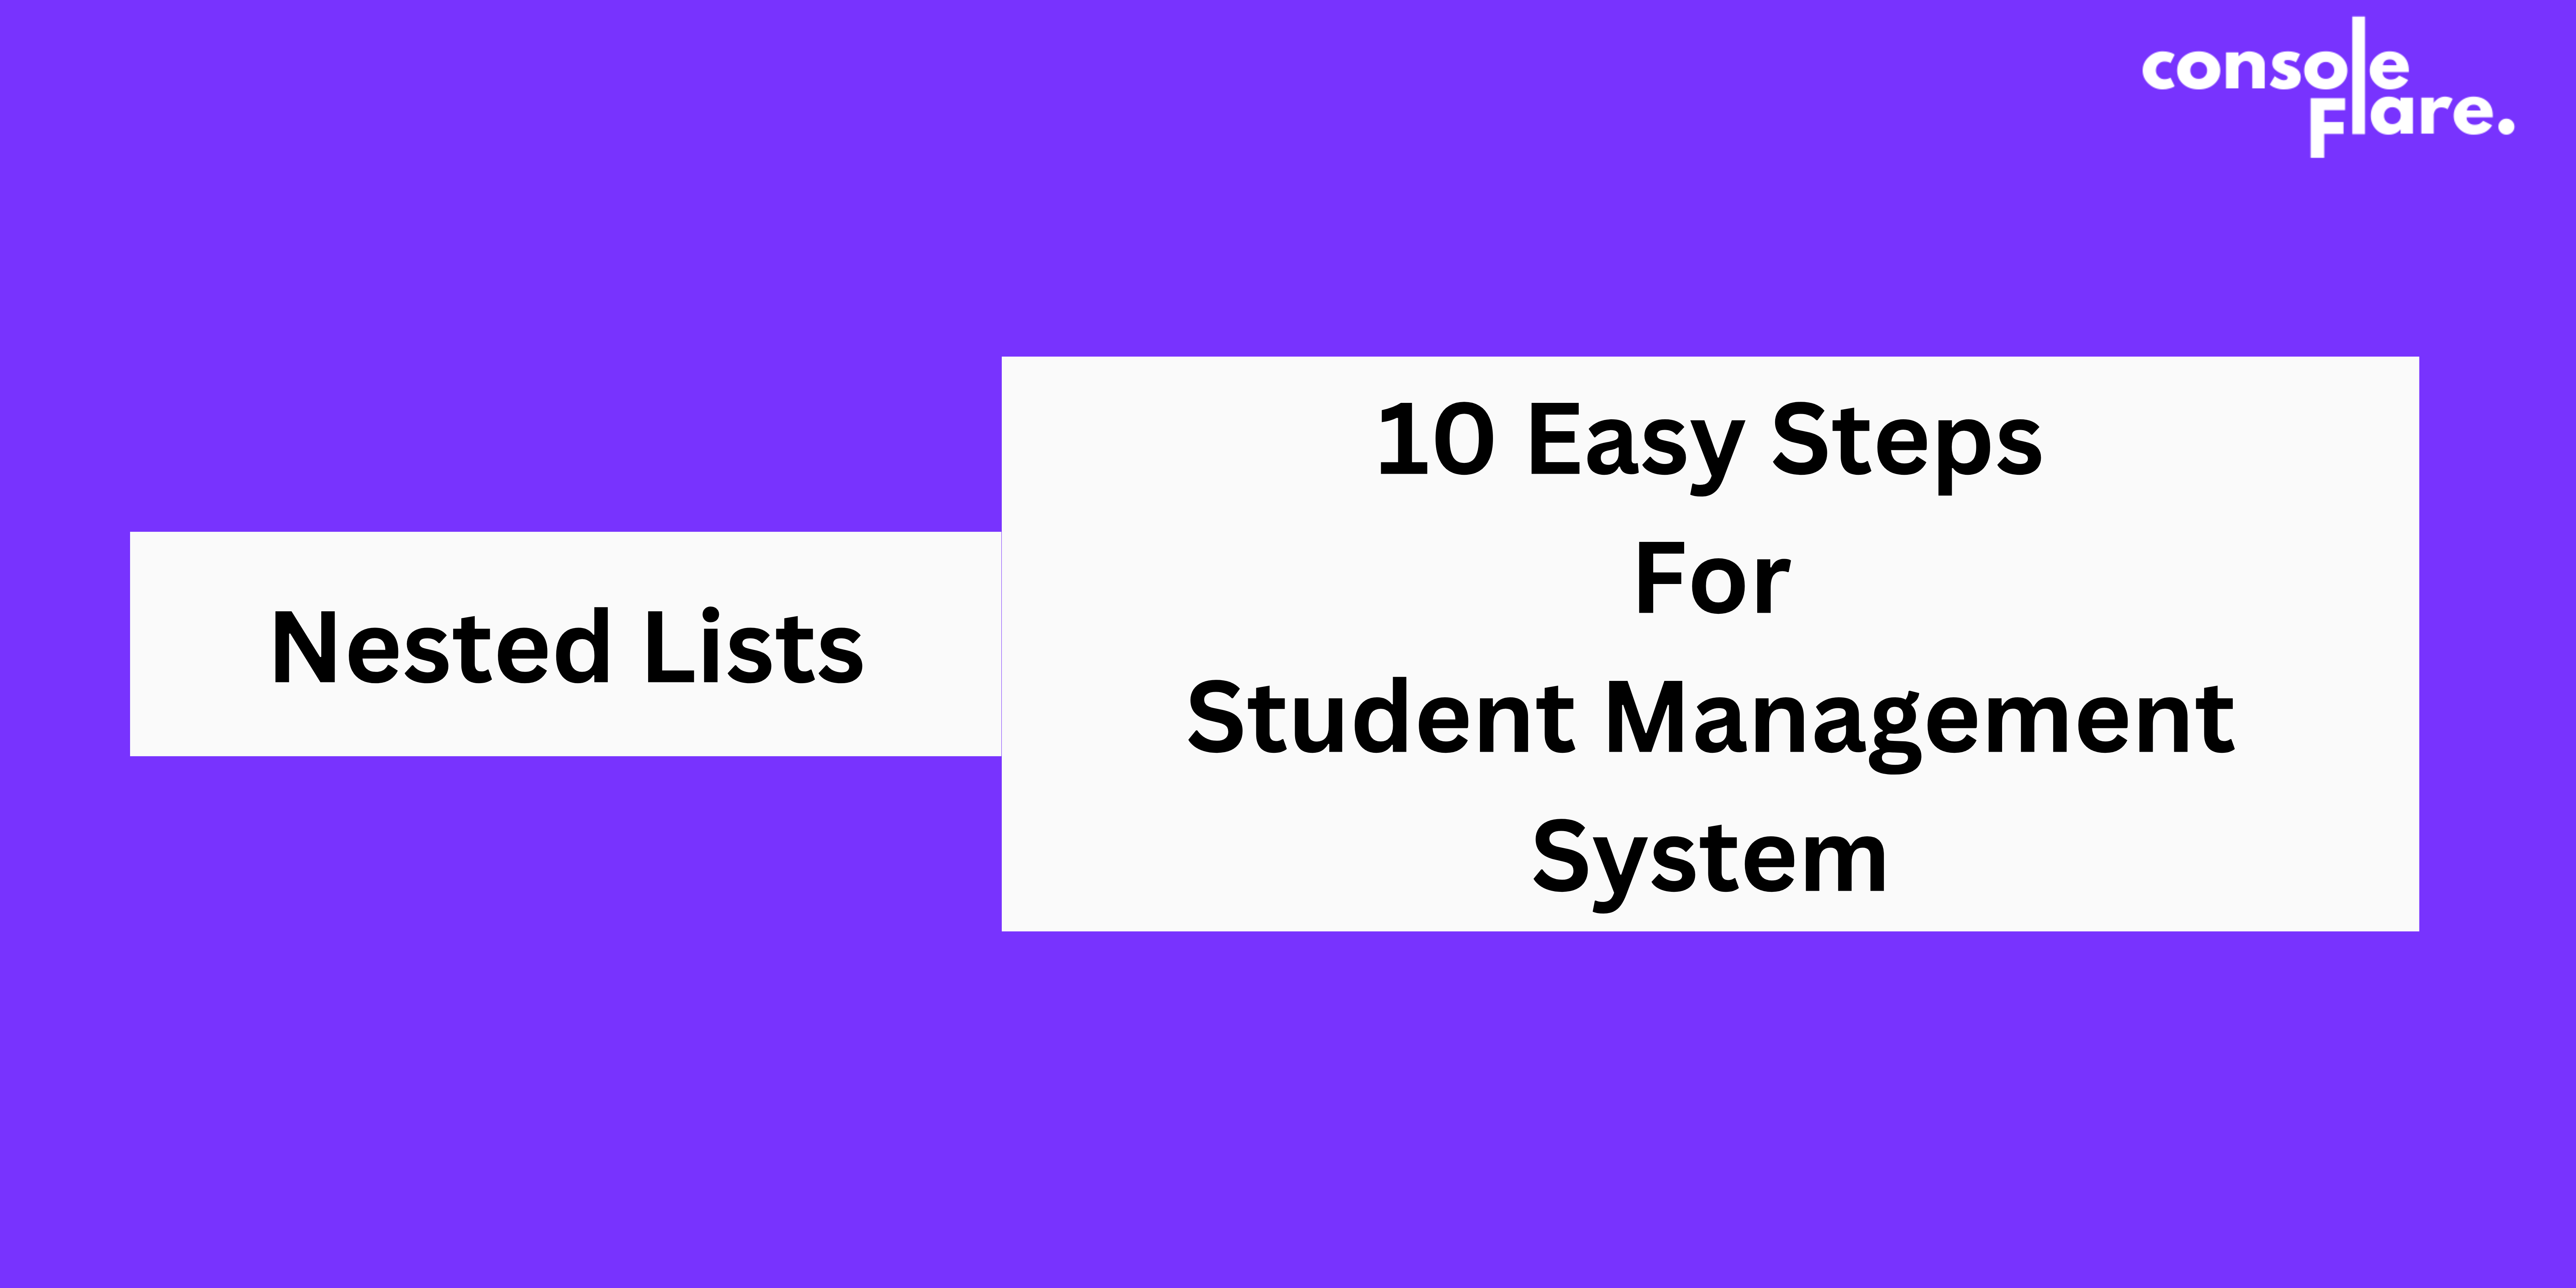 Nested Lists: 10 Easy Steps for Student Management System